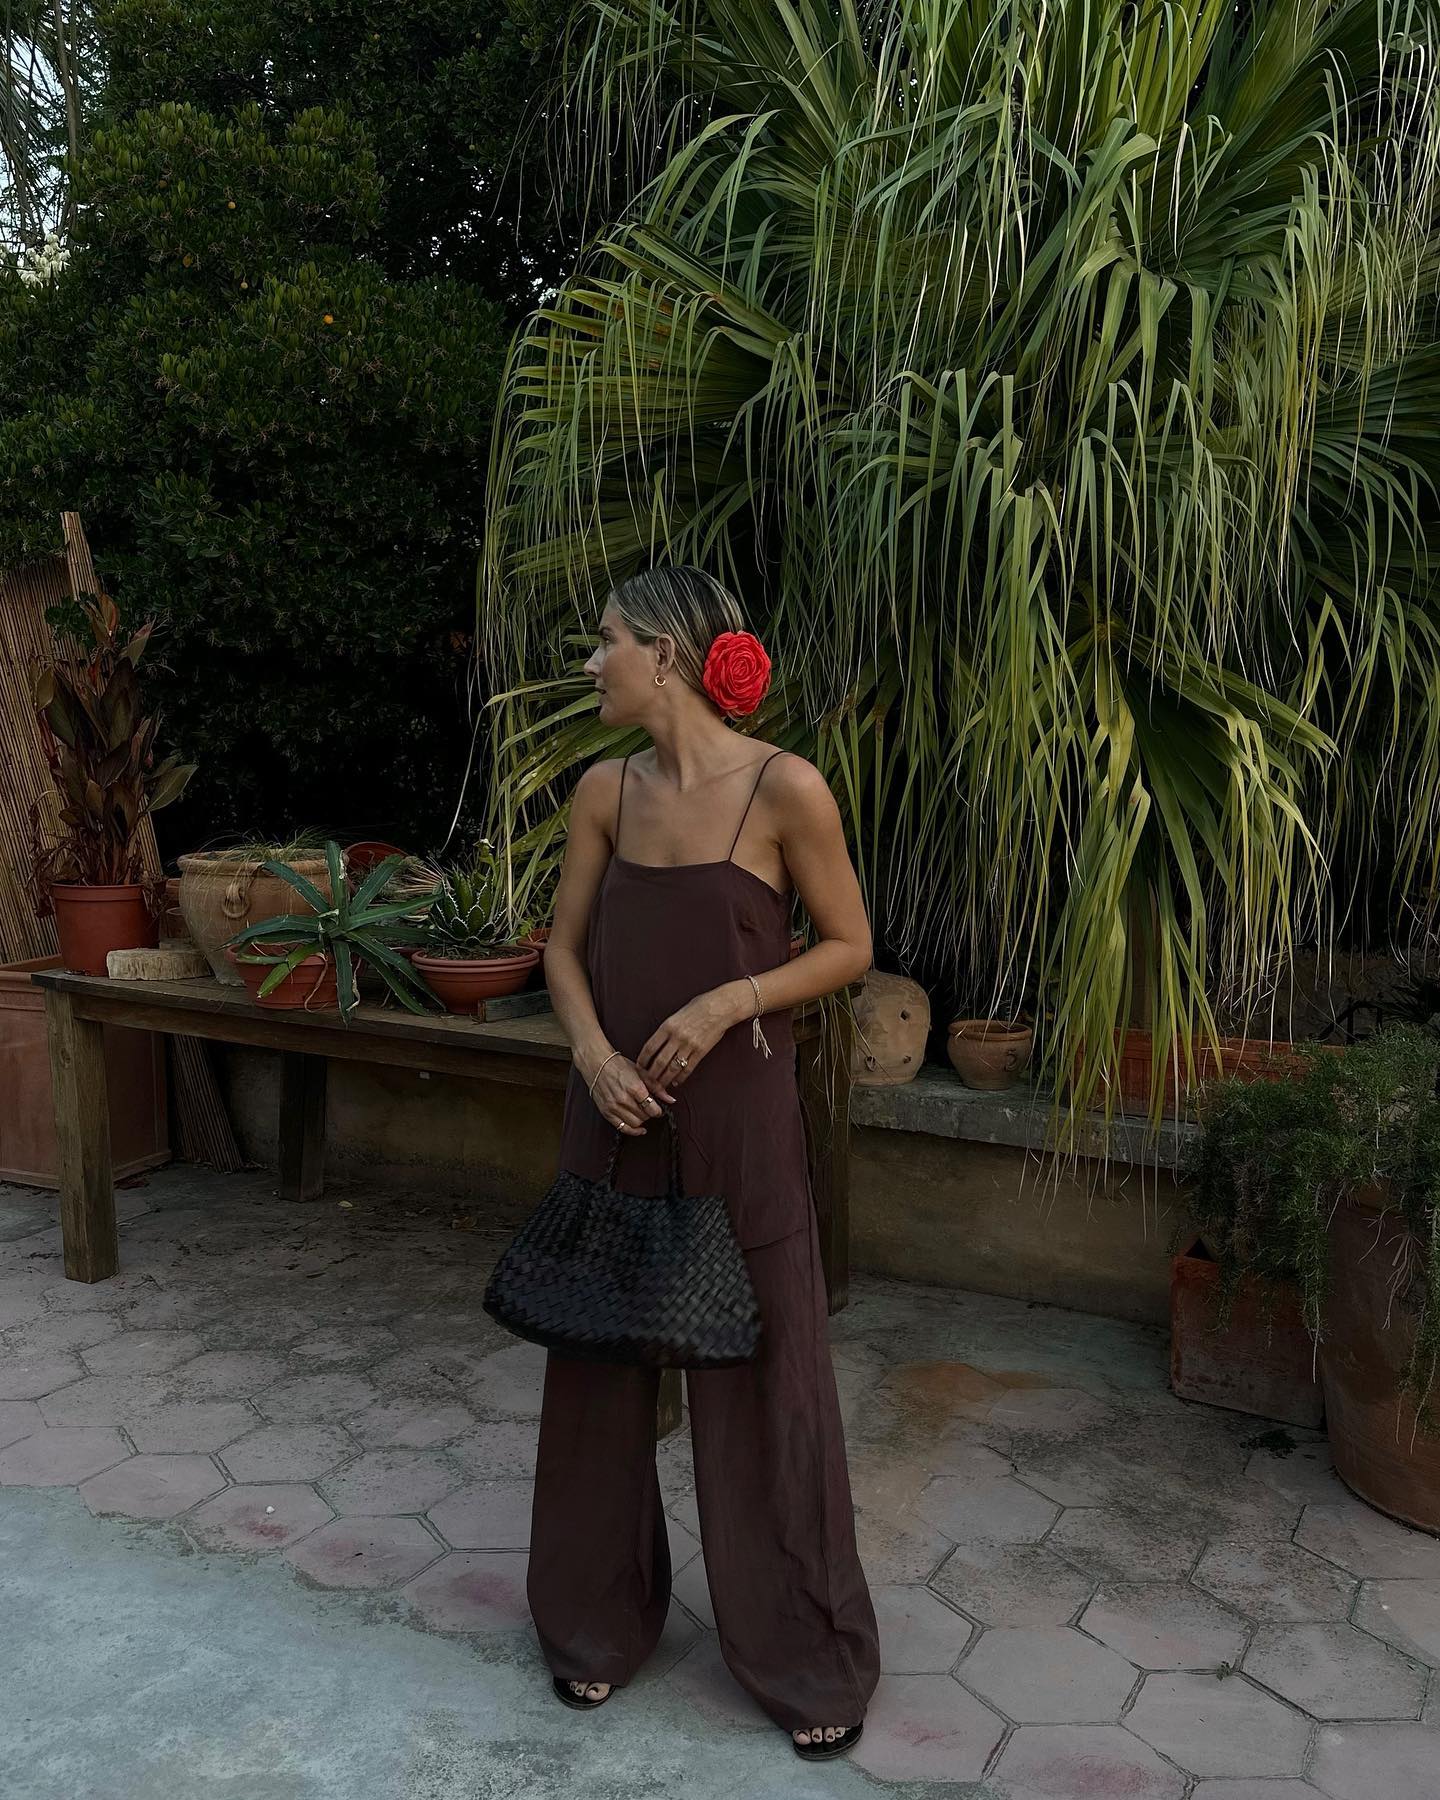 Elegant Summer Style: @lucywilliams02 wears a brown linen jumpsuit with a red floral corsage in her hair